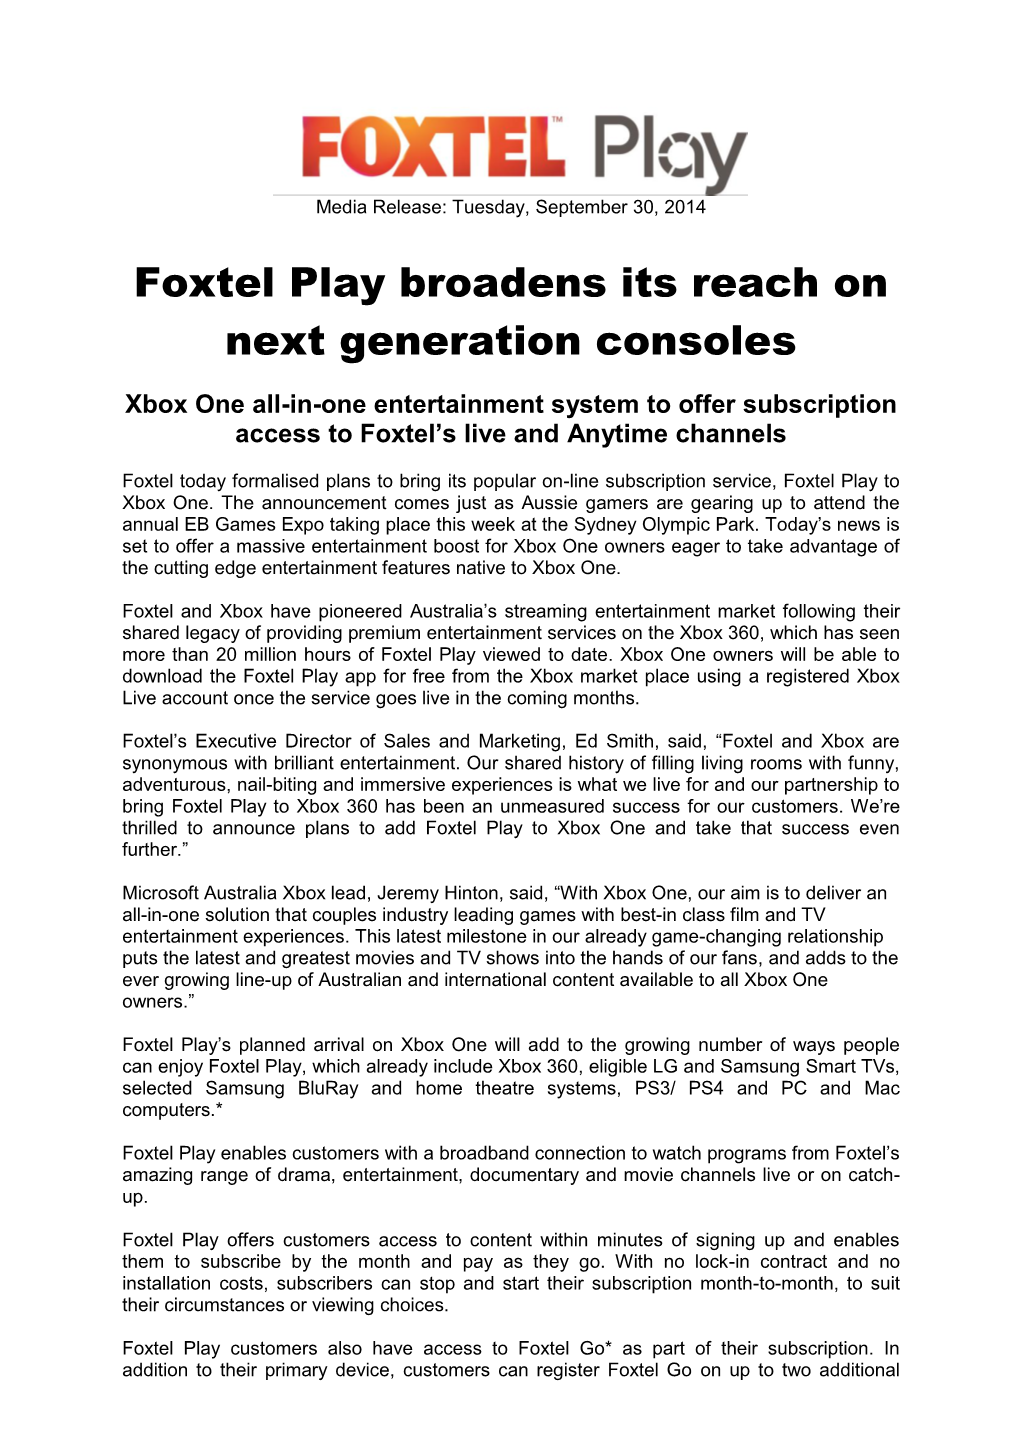 Foxtel Play Broadens Its Reach on Next Generation Consoles